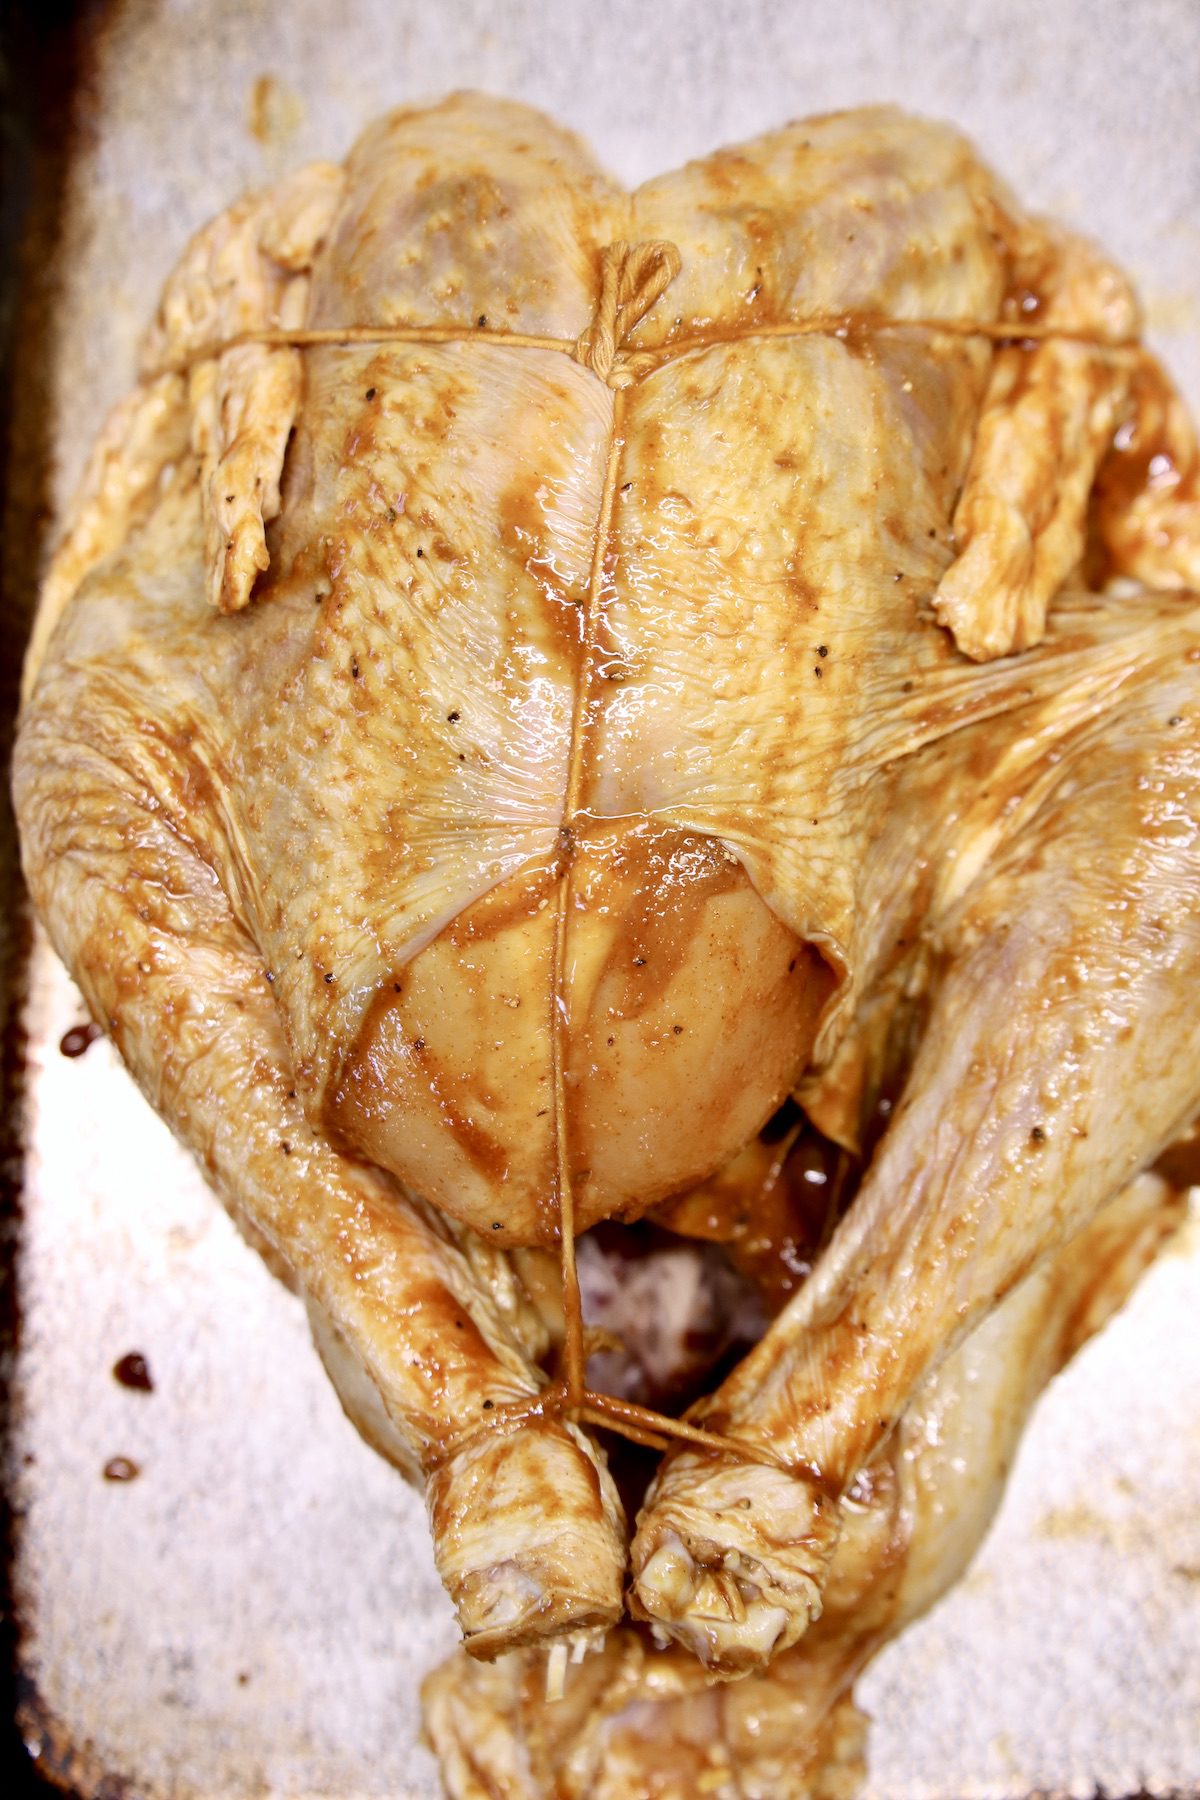 molasses mustard glazed turkey - trussed and ready to grill